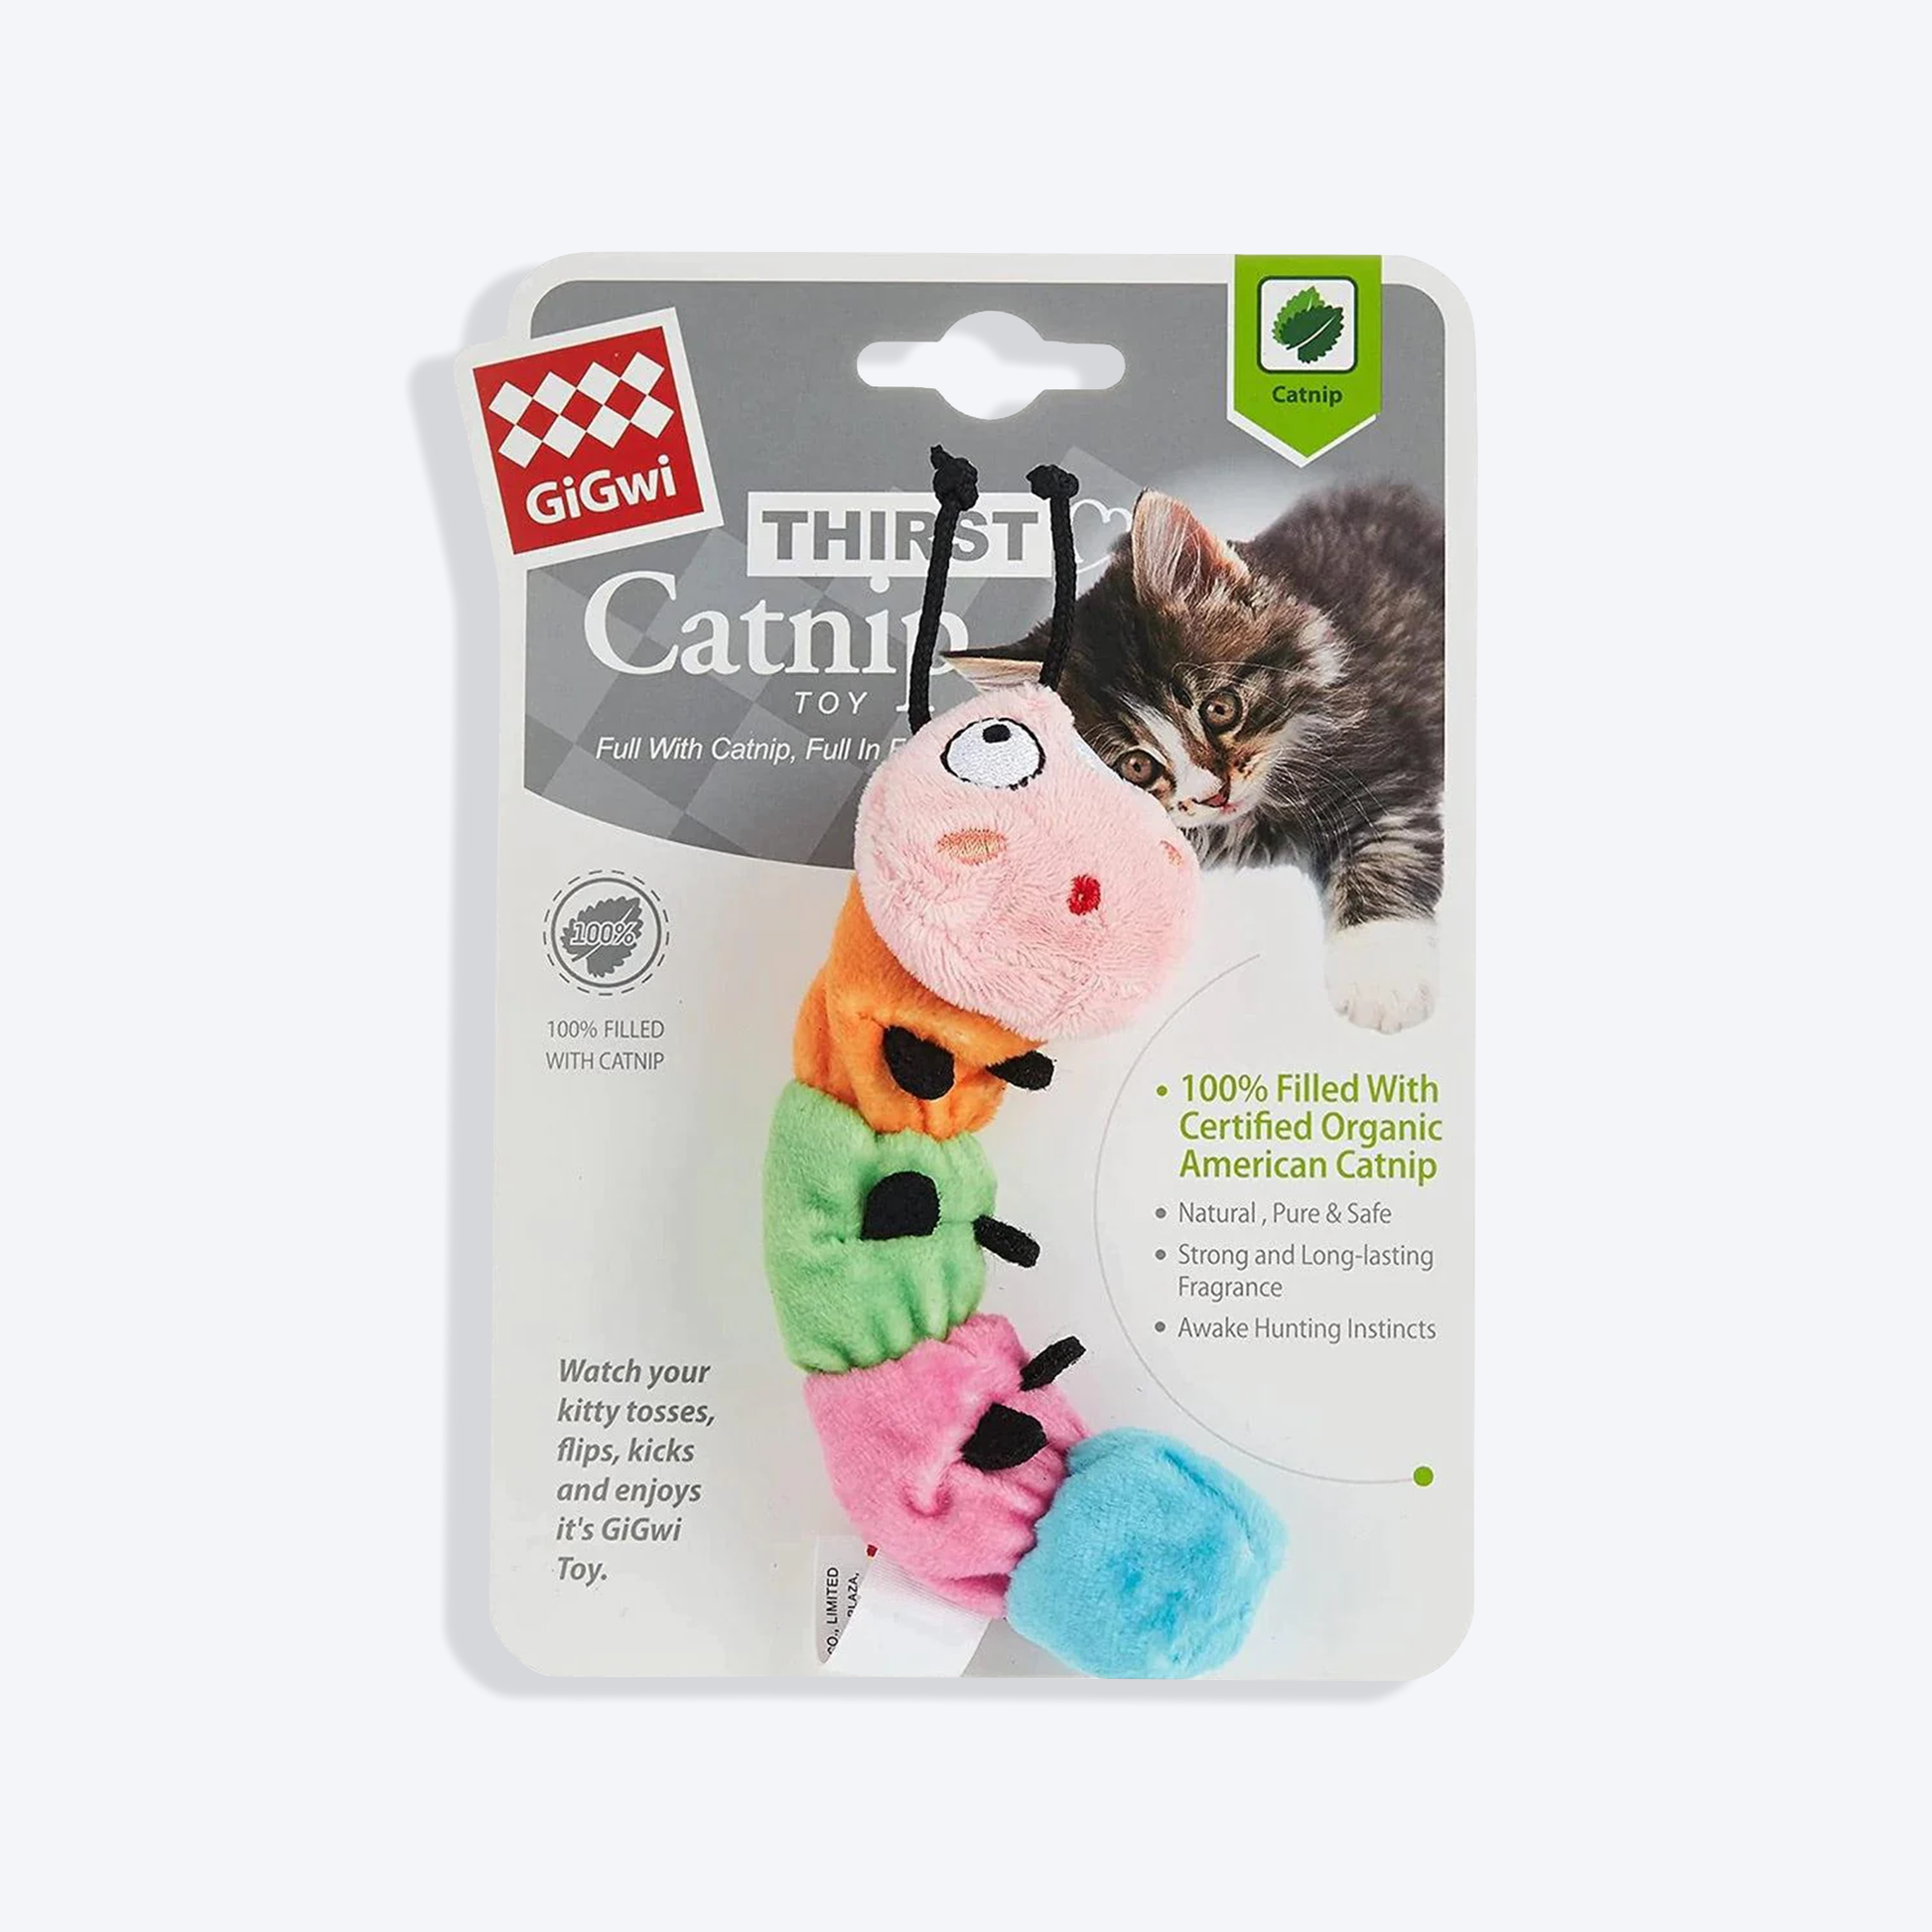 GiGwi Thirsty Catnip Cat Toy - Caterpillar Filled with 100% organic Catnip inside - Heads Up For Tails